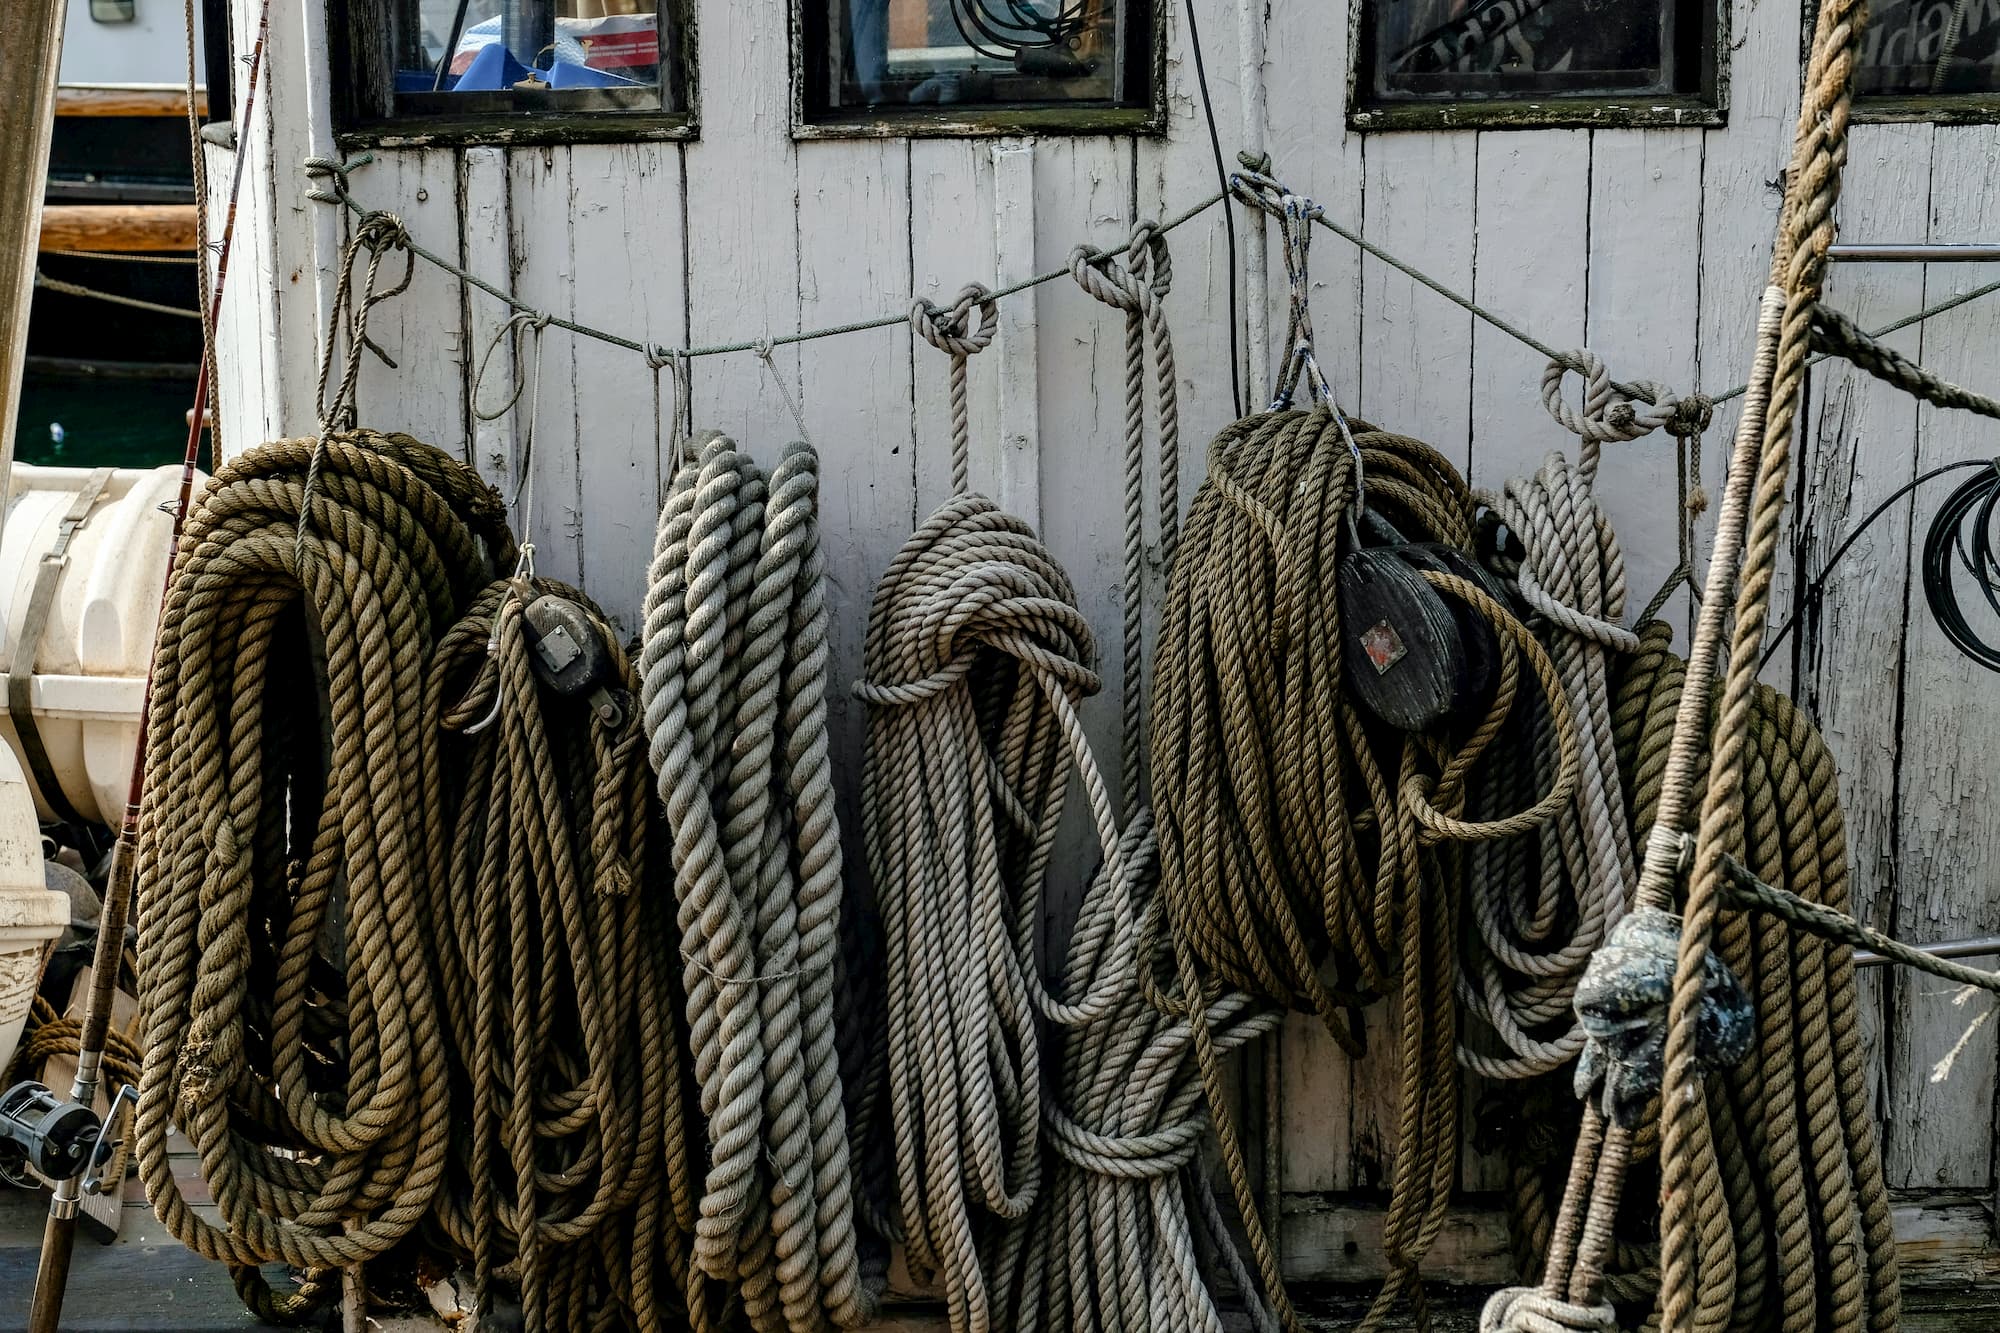 A Guide to Mooring Lines from upffront.com